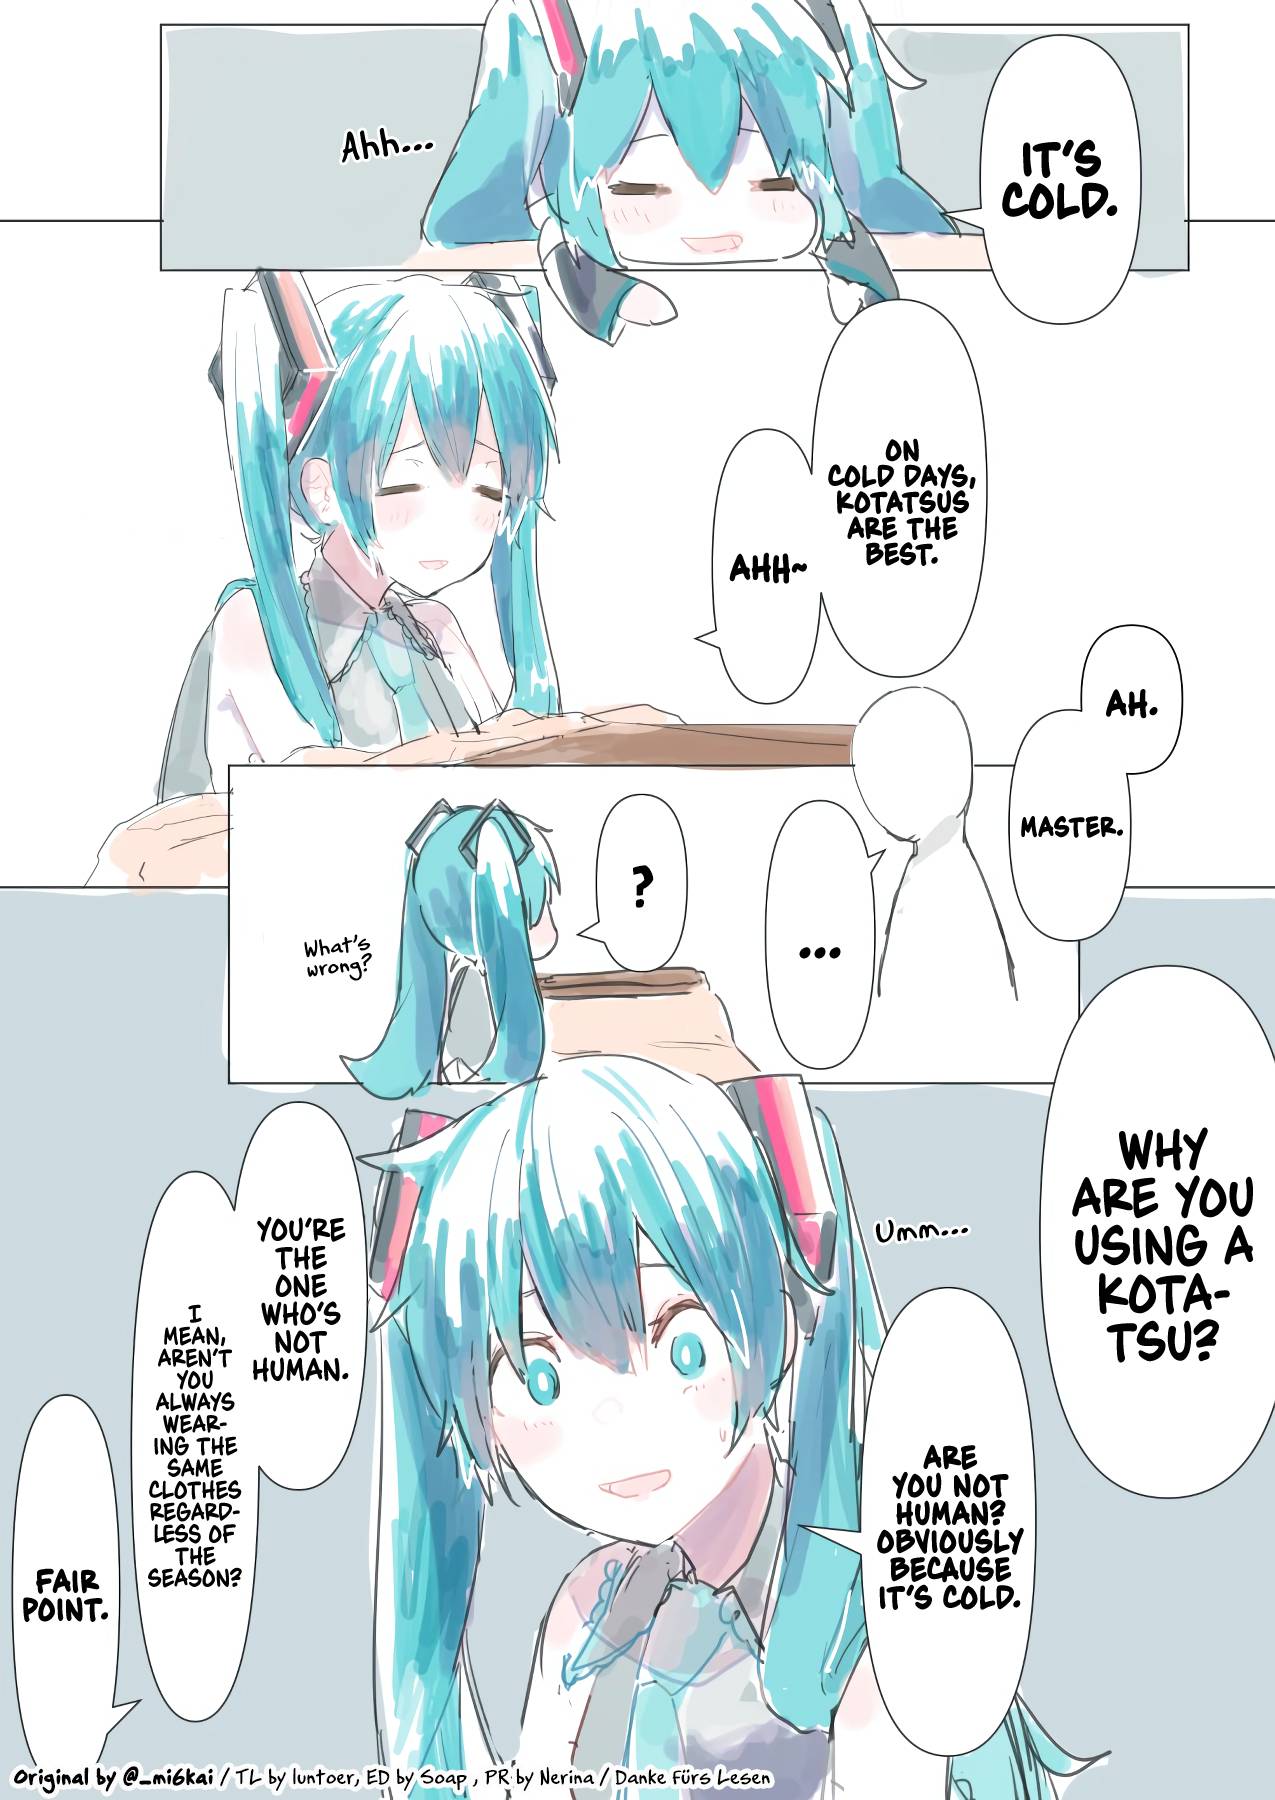 The Daily Life Of Master & Hatsune Miku - chapter 7 - #1